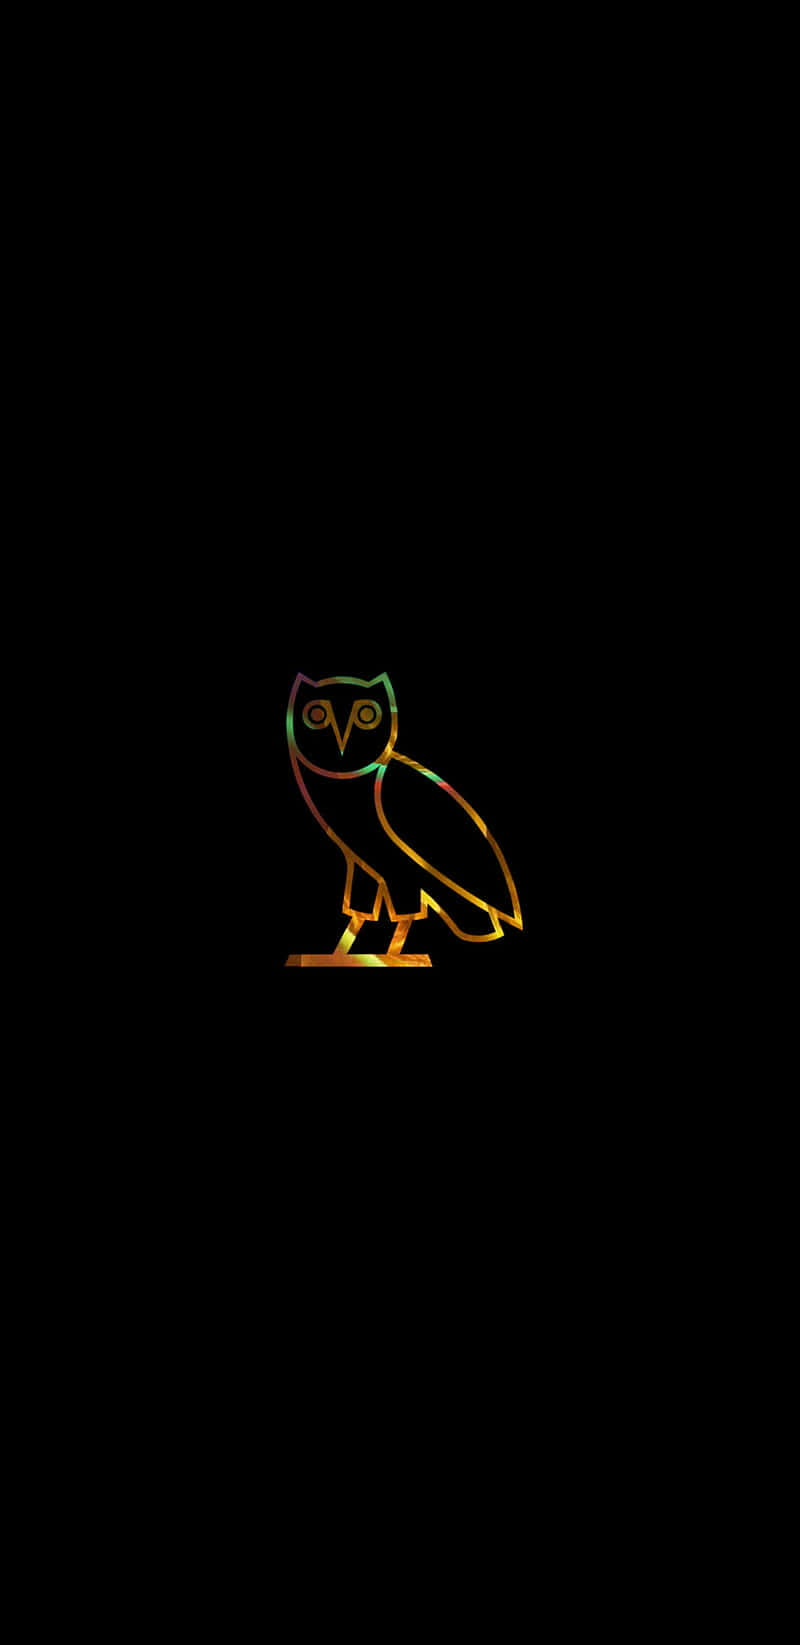 Celebrate hip-hop artist and producer Drake with this exclusive OVO Owl iPhone wallpaper Wallpaper